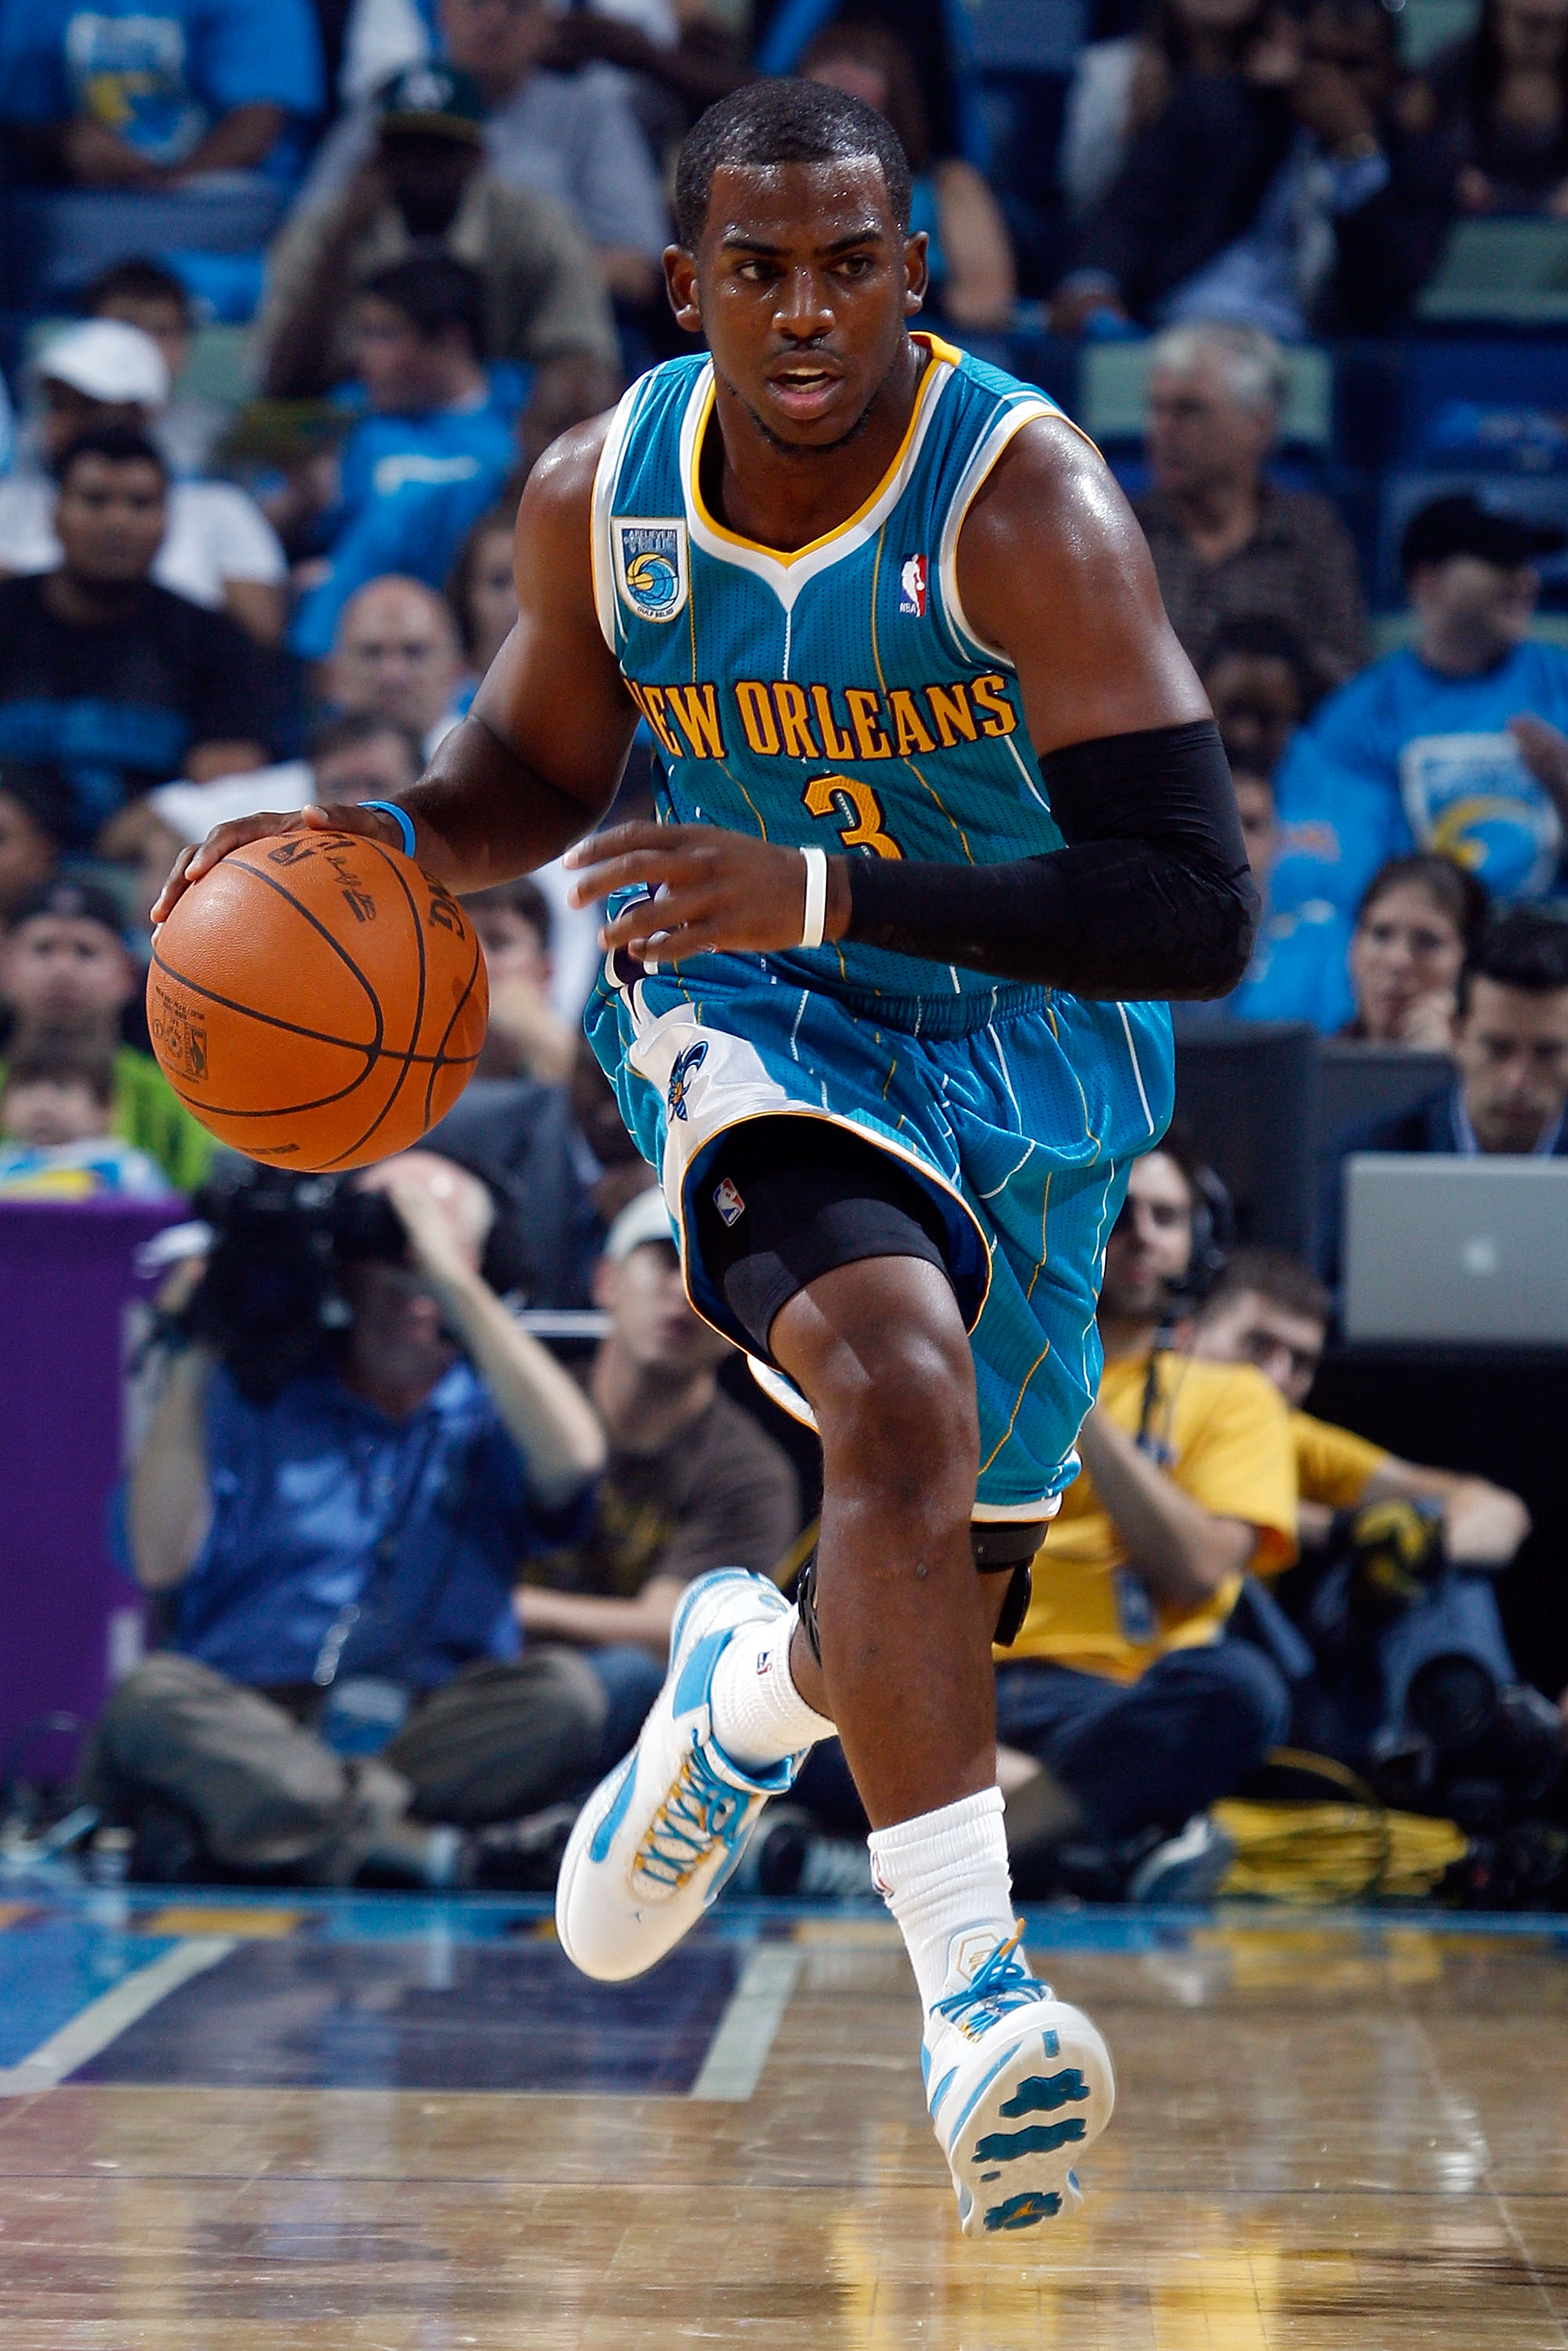 NEW ORLEANS - OCTOBER 27:  Chris Paul #3 of the New Orleans Hornets drives the ball up the court during the game against the Milwaukee Bucks at the New Orleans Arena on October 27, 2010 in New Orleans, Louisiana.   The Hornets defeated the Bucks 95-91.